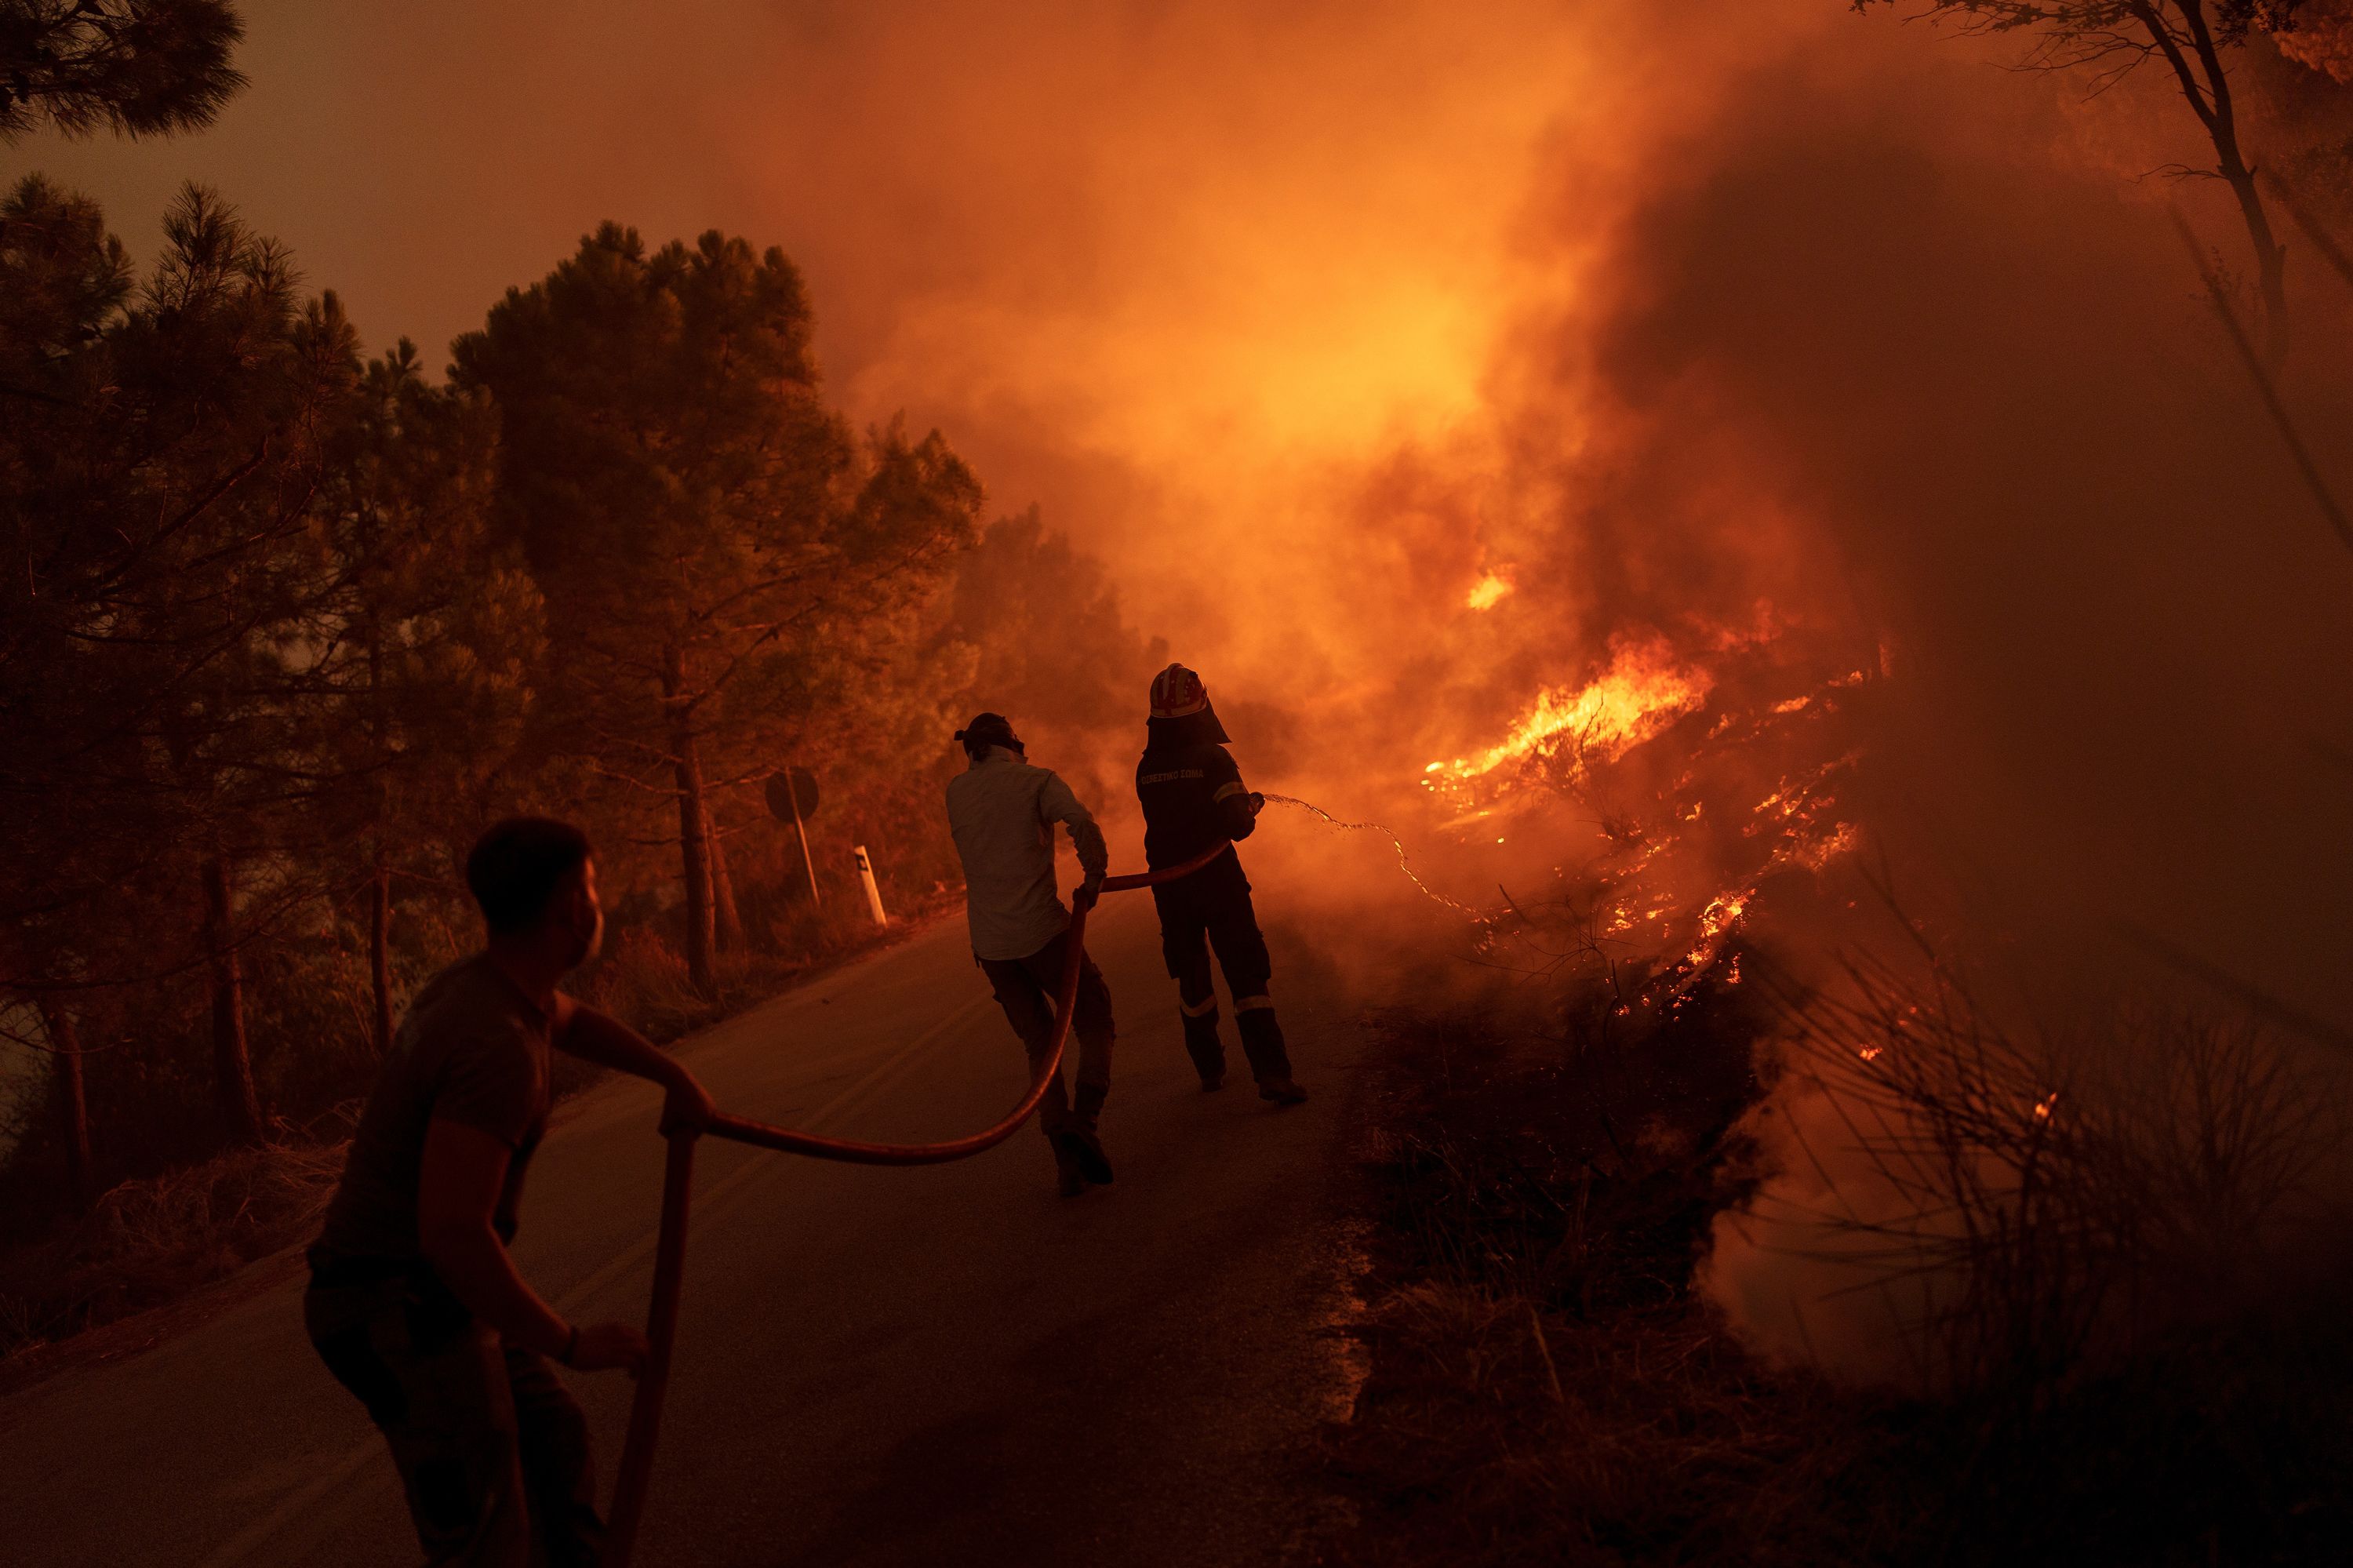 Firefighters and volunteers work to extinguish a wildfire near the village of Dikella, west of Alexandroupolis, Greece, on Tuesday, August 22.